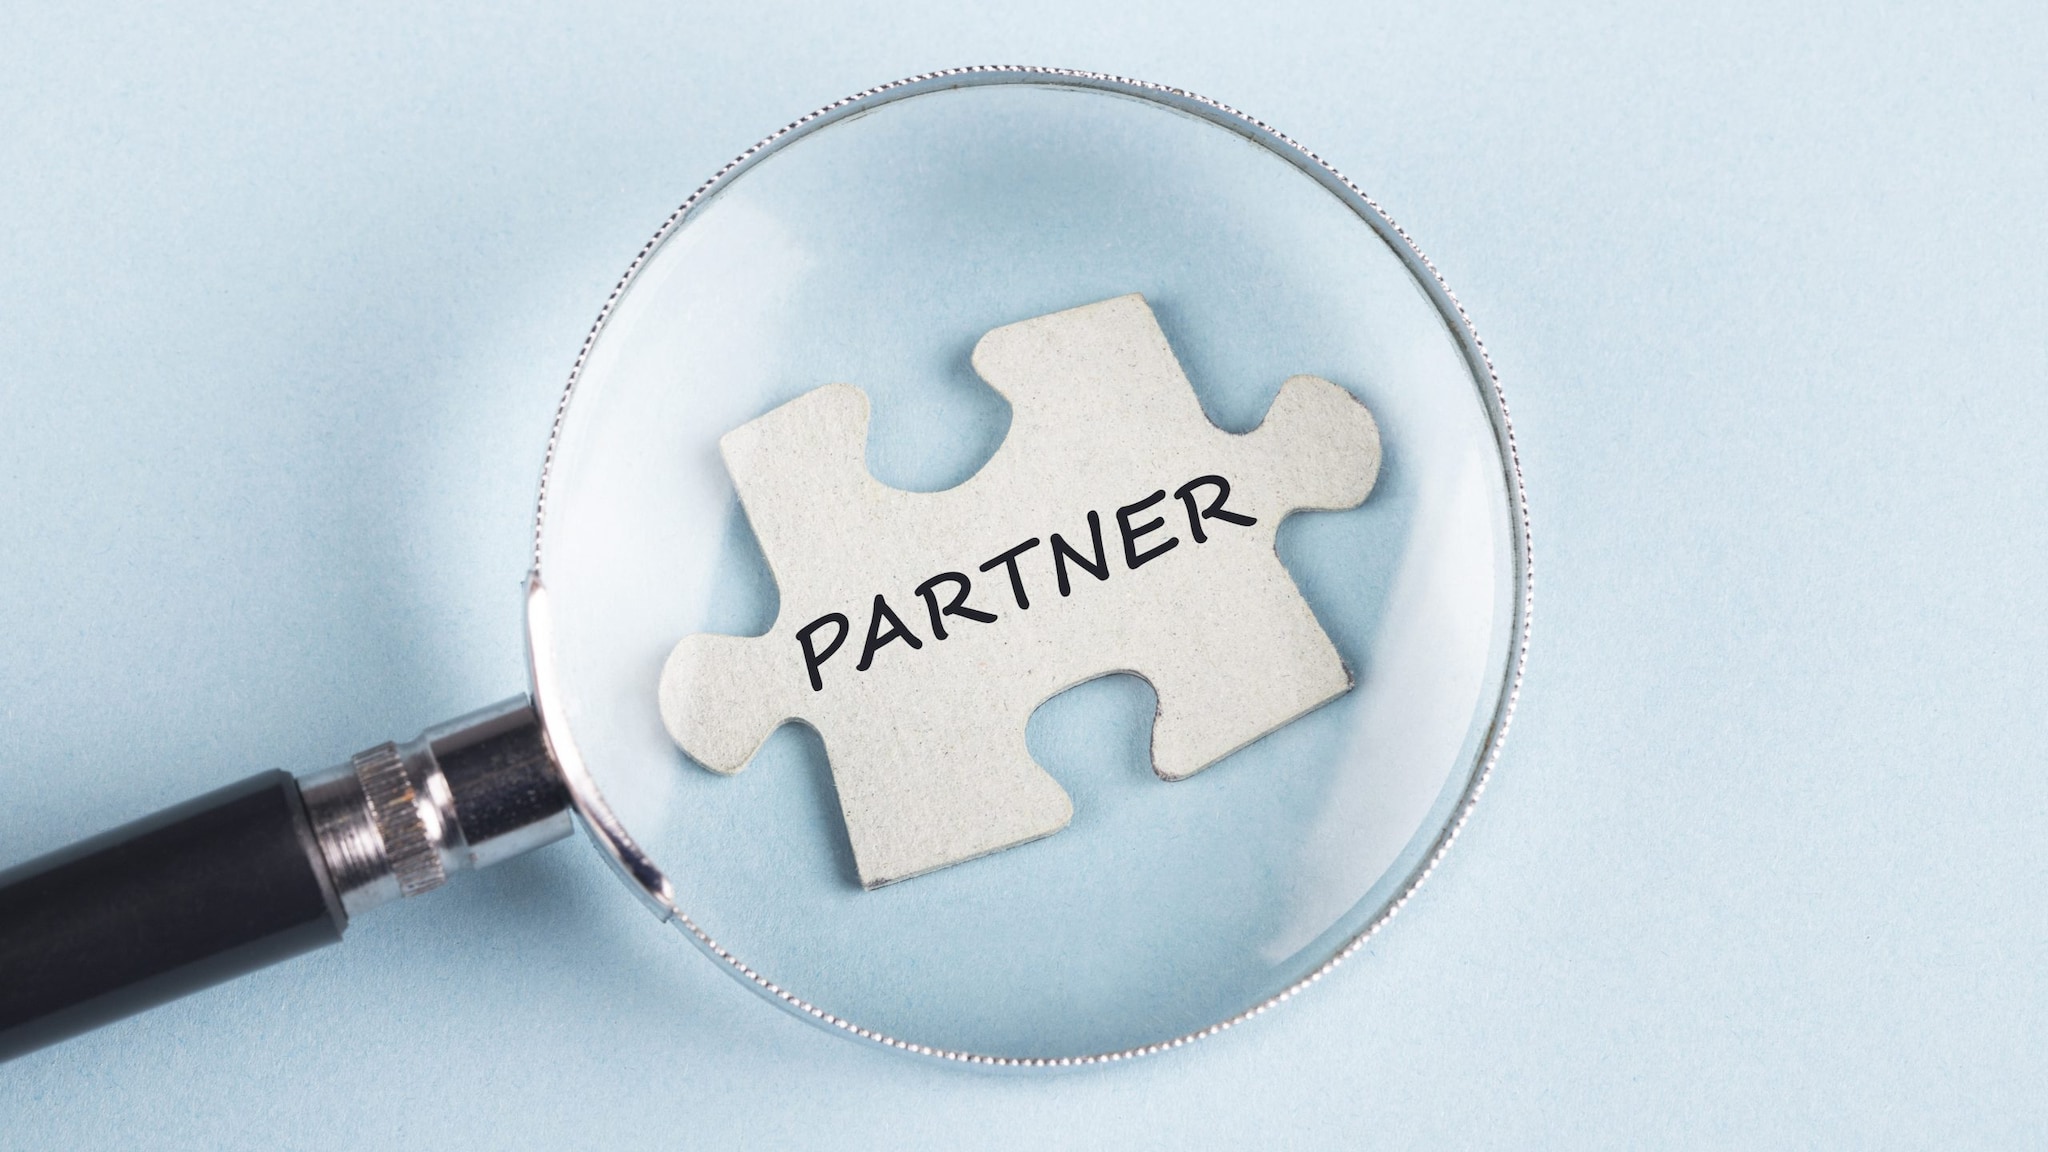 puzzle piece with "partner" on it.